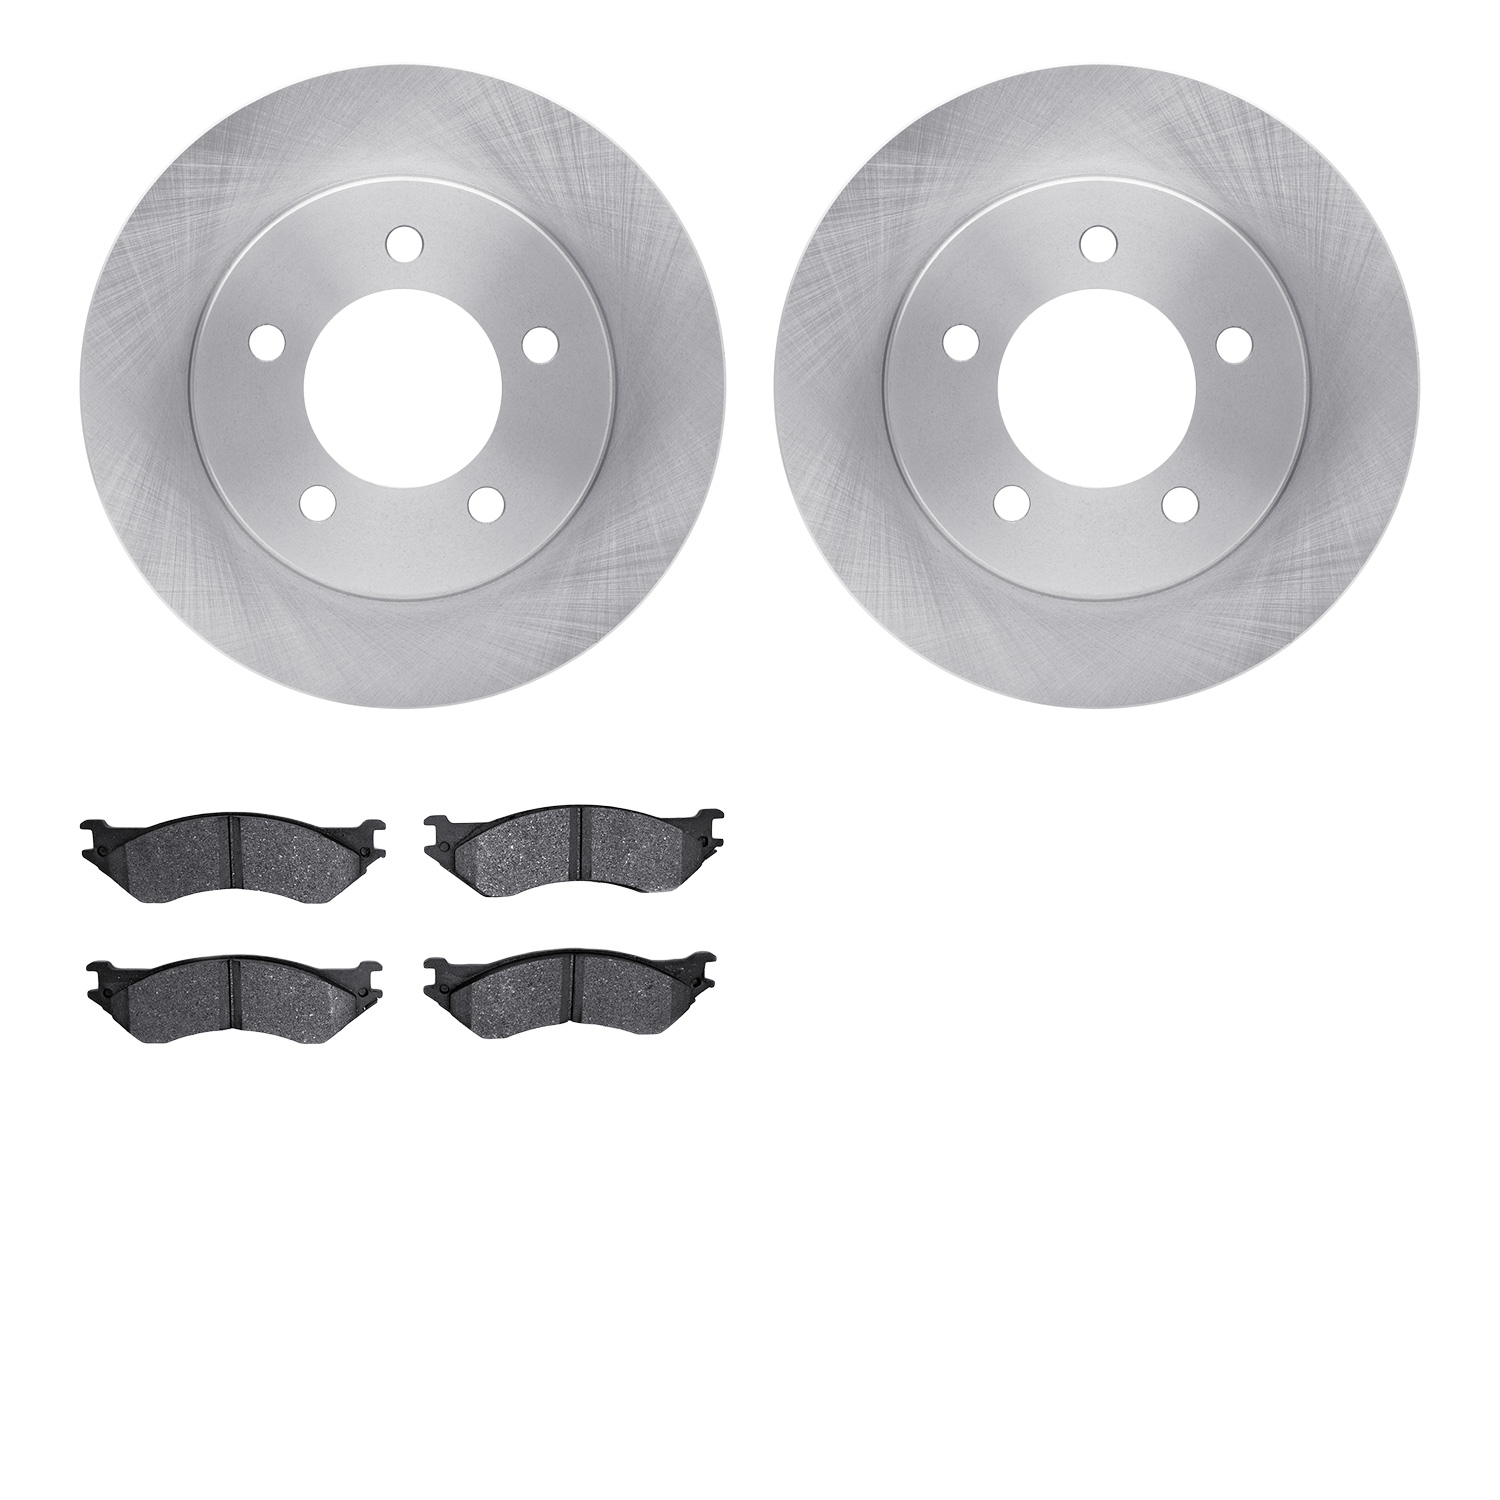 6402-54185 Brake Rotors with Ultimate-Duty Brake Pads, 1997-2002 Ford/Lincoln/Mercury/Mazda, Position: Front